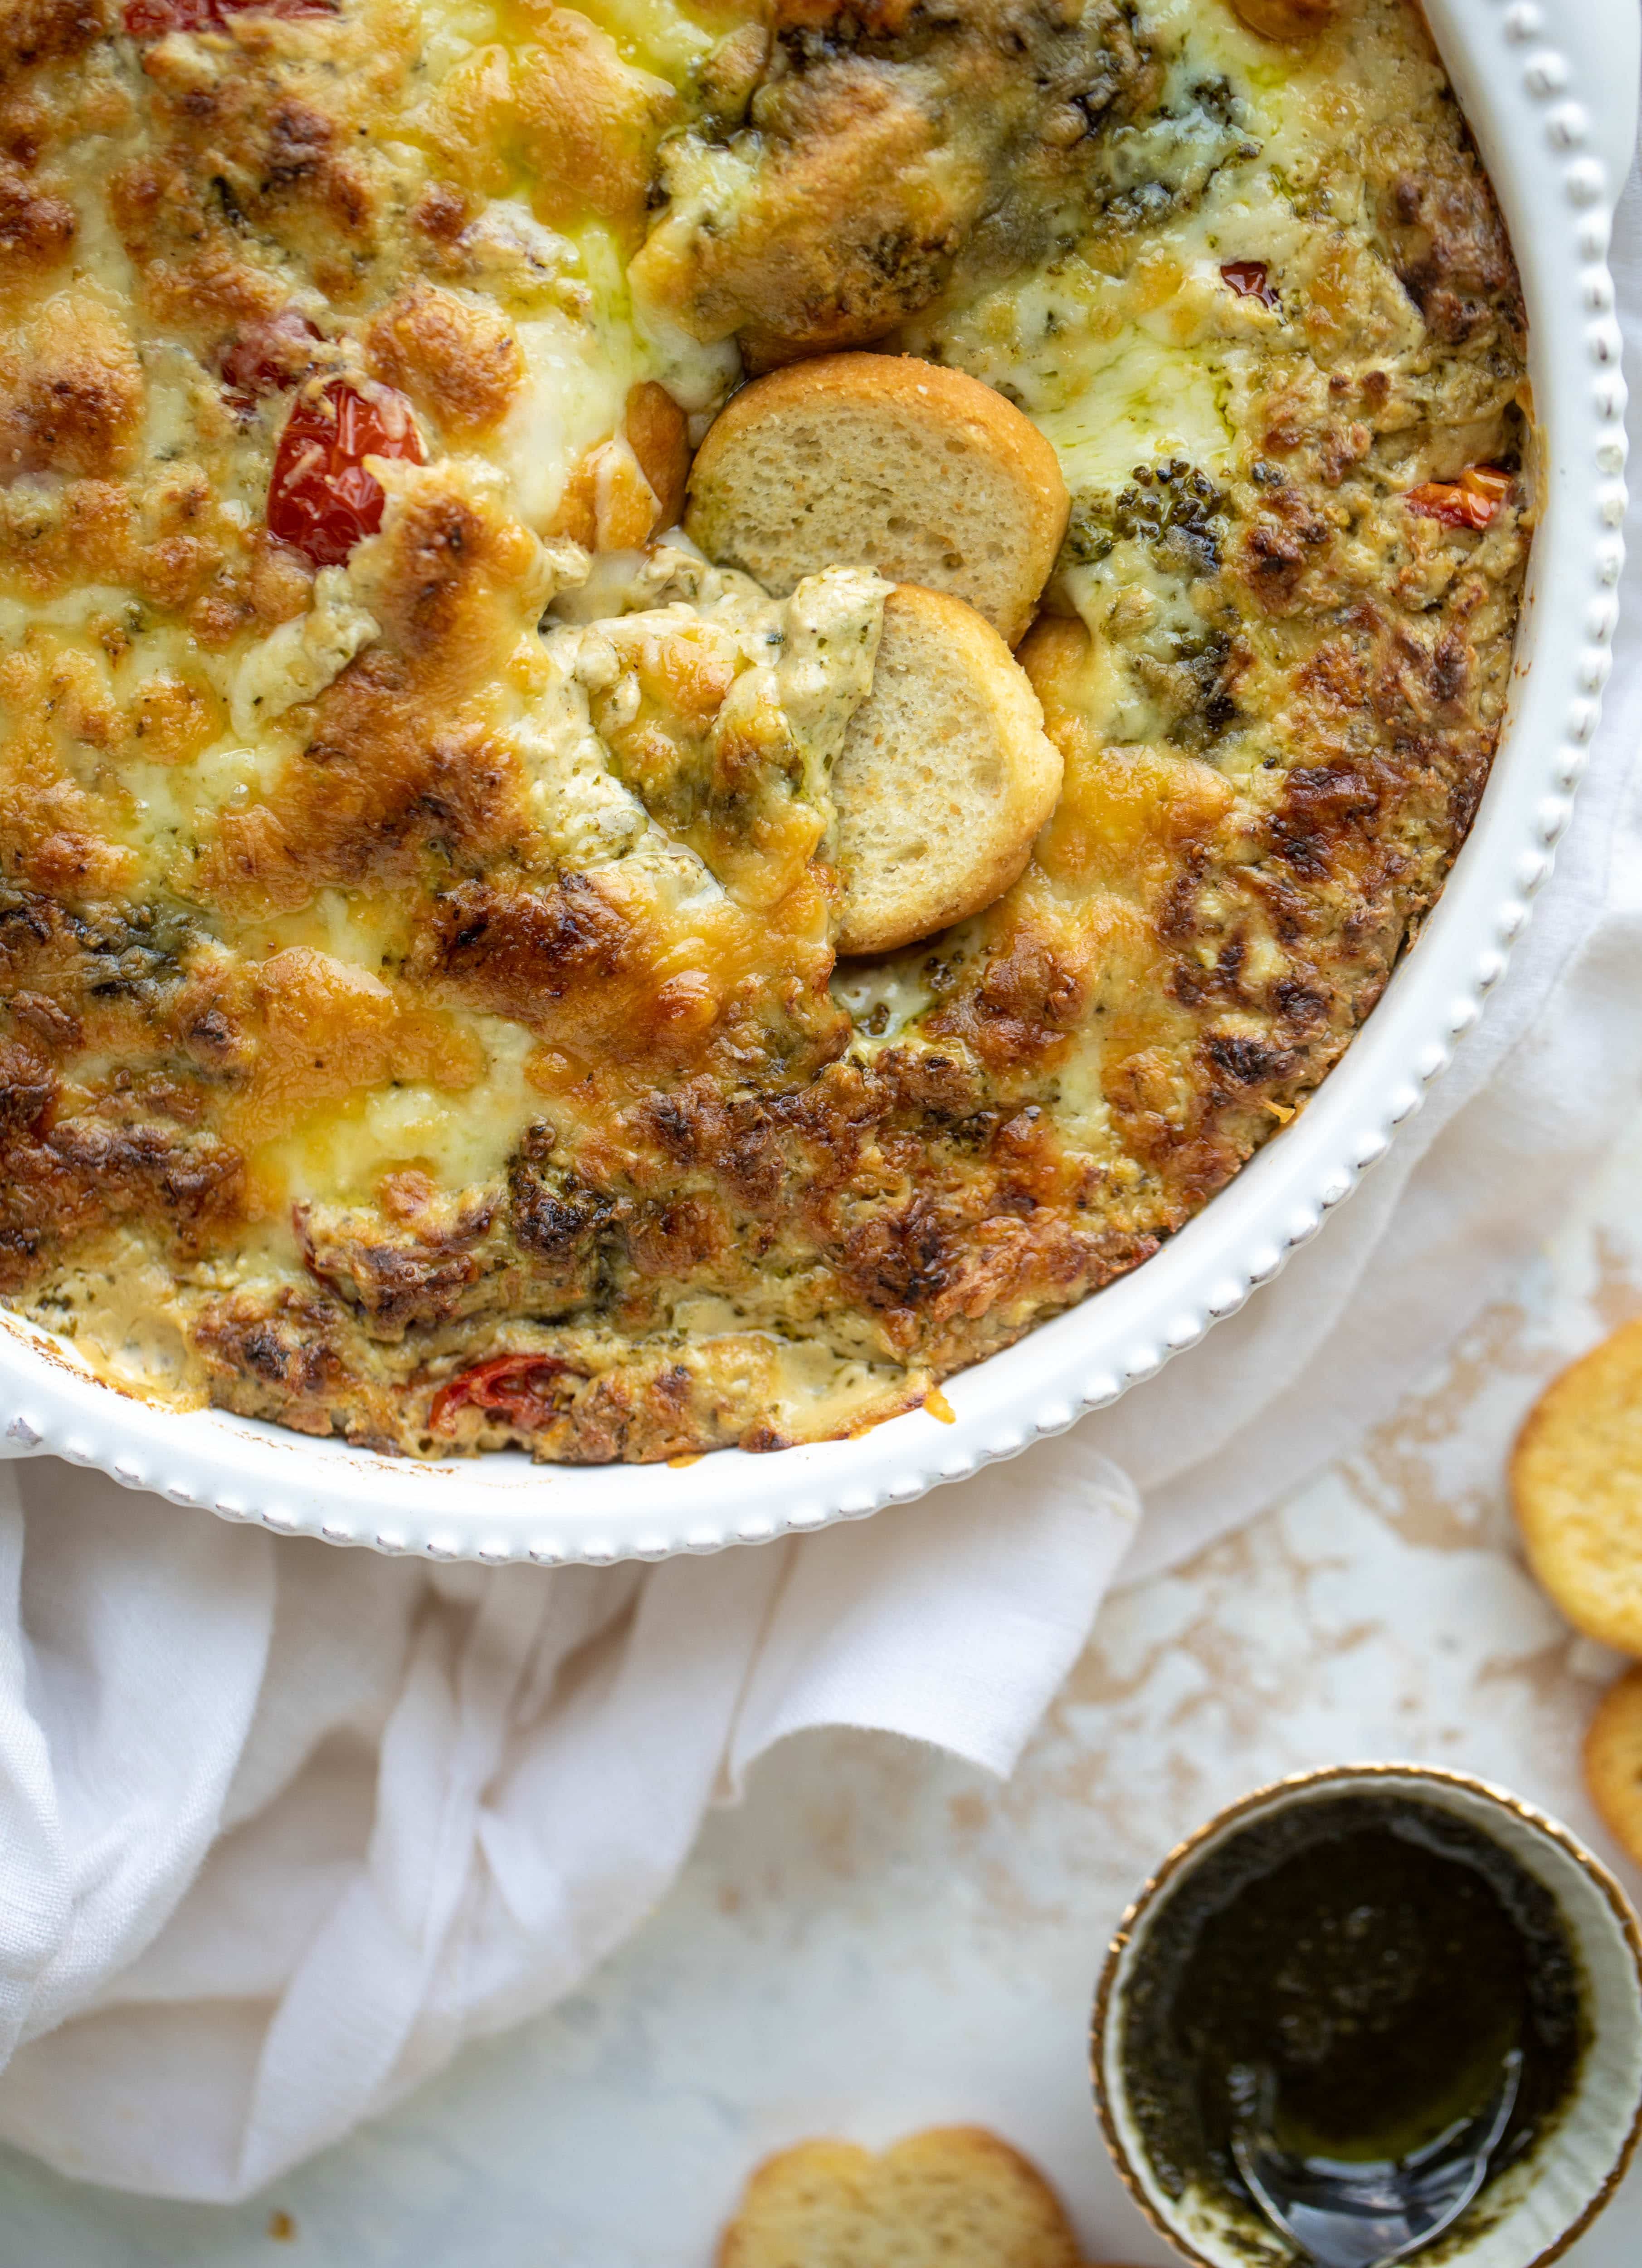 This cheesy pesto chicken dip is a great way to use up your end-of-summer herbs! Lots of delicious smoky flavor and tons of bubbly cheese.